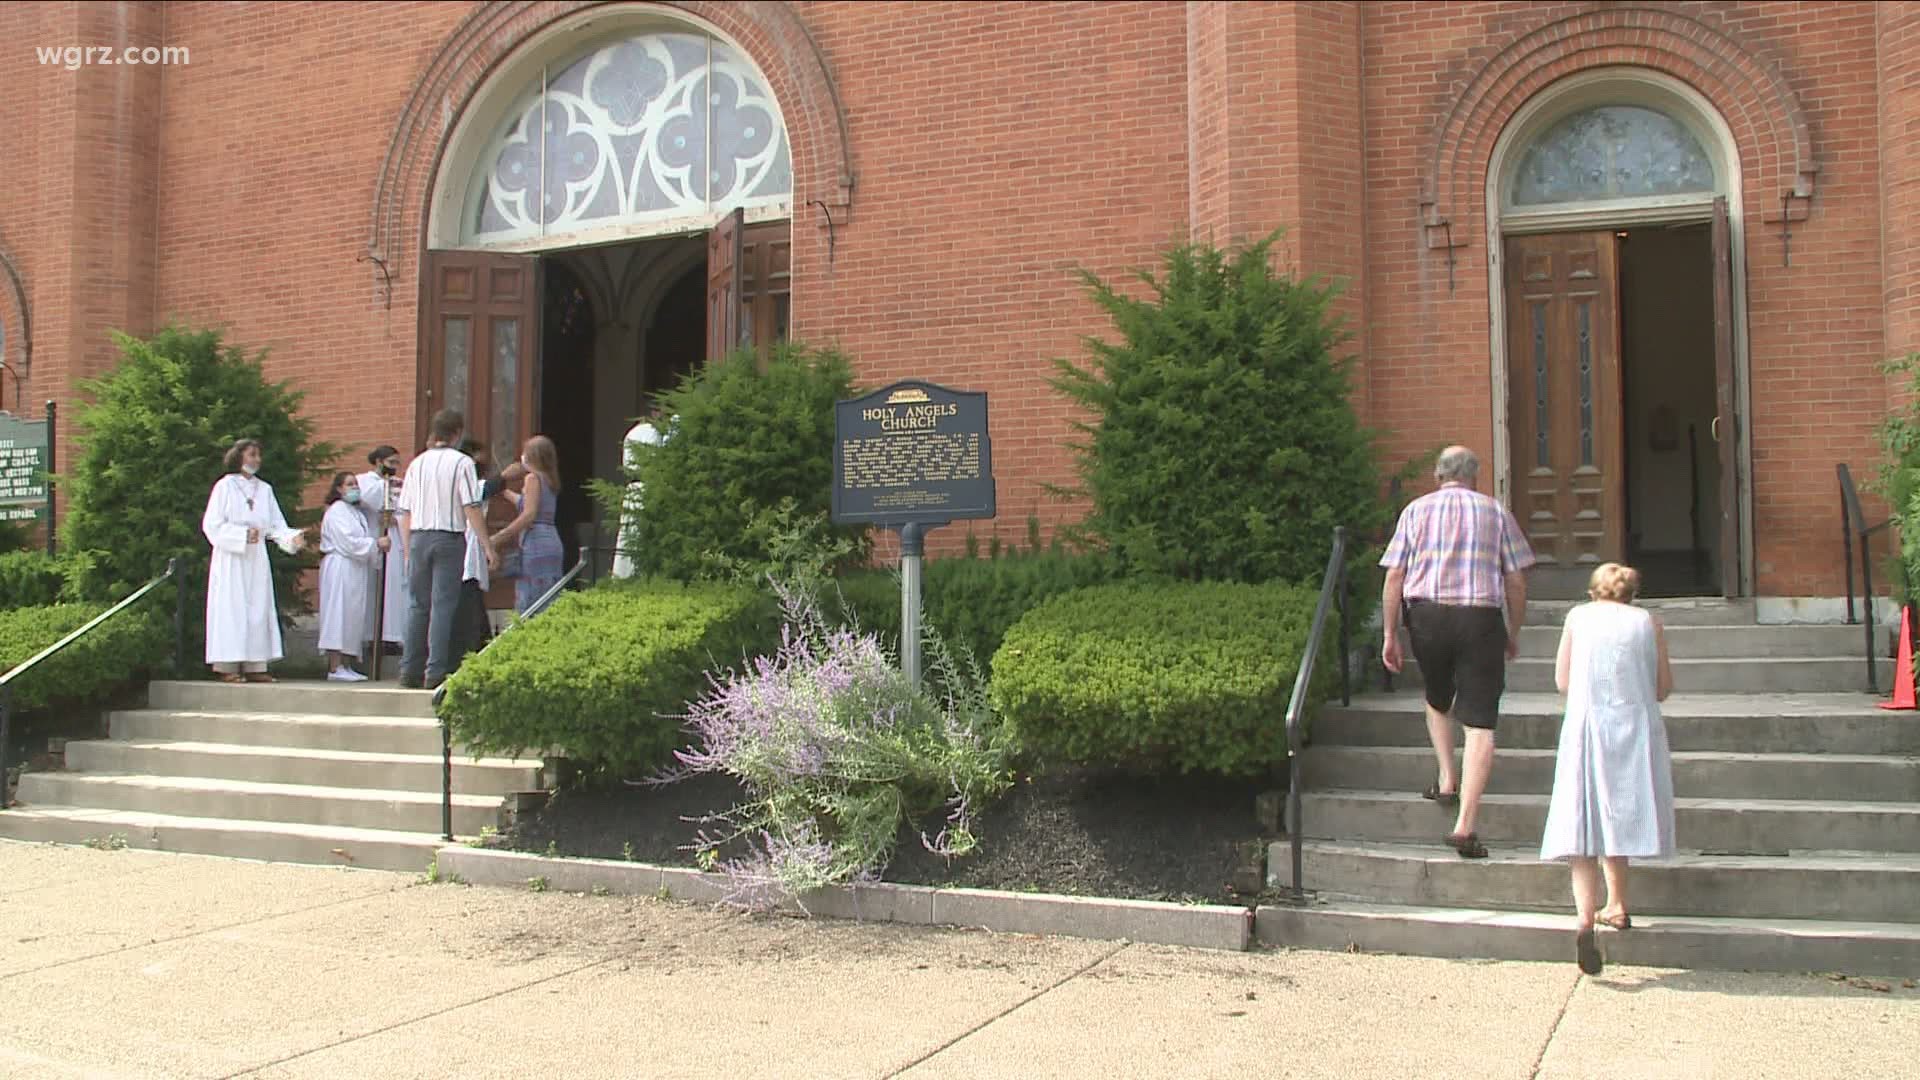 The west side Buffalo Church on Porter Avenue will close after today because of financial issues. The building has been around for more than 150 years.